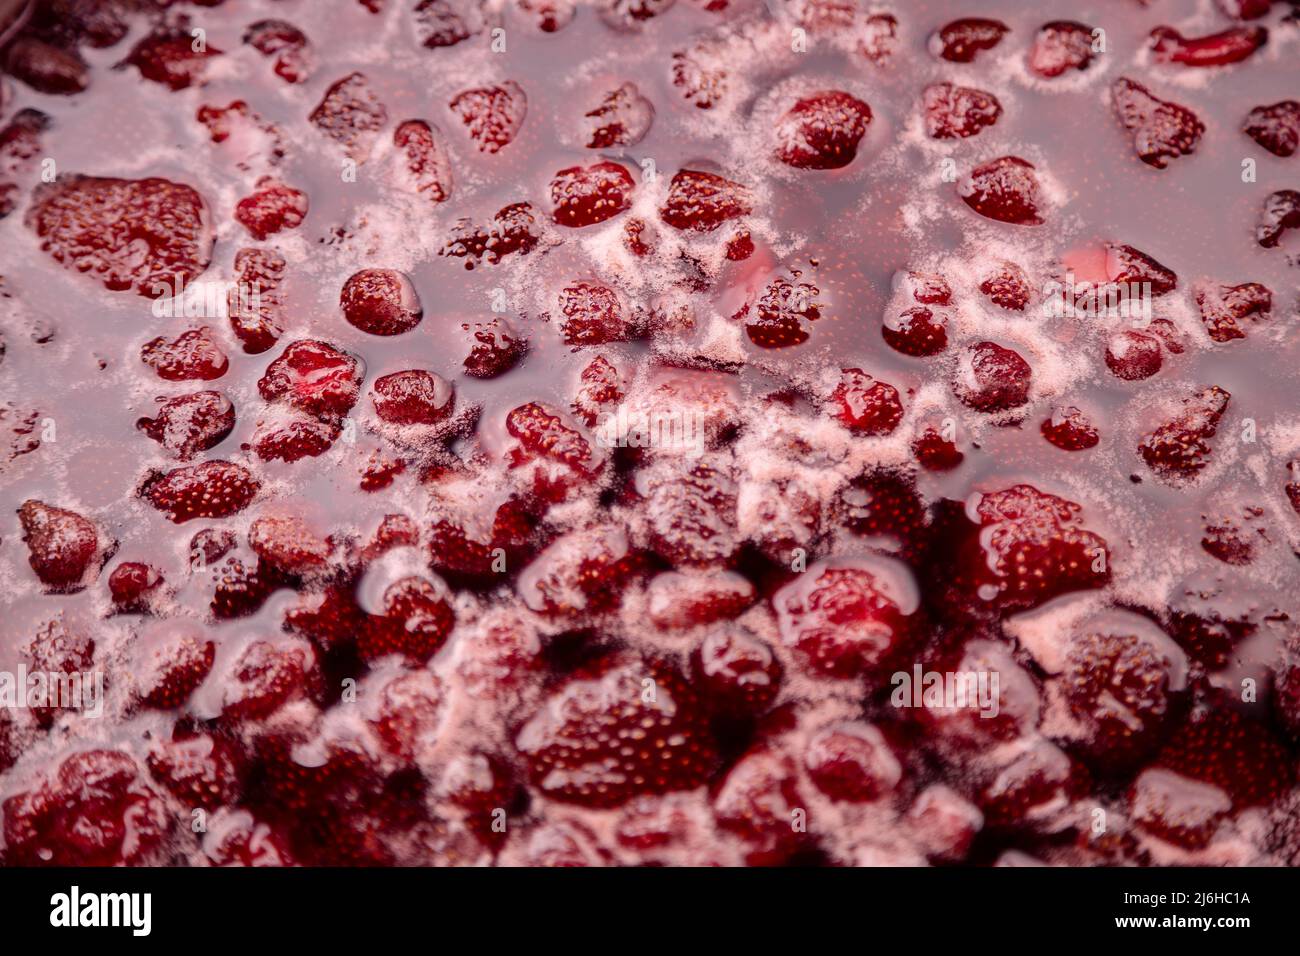 Close-up of strawberry jelly boiling in a saucepan. Preparation of strawberry jelly, marmalade or strawberry sauce. Make a strawberry jam. Boil strawberries in the pan. Soft focus, Close Up Stock Photo